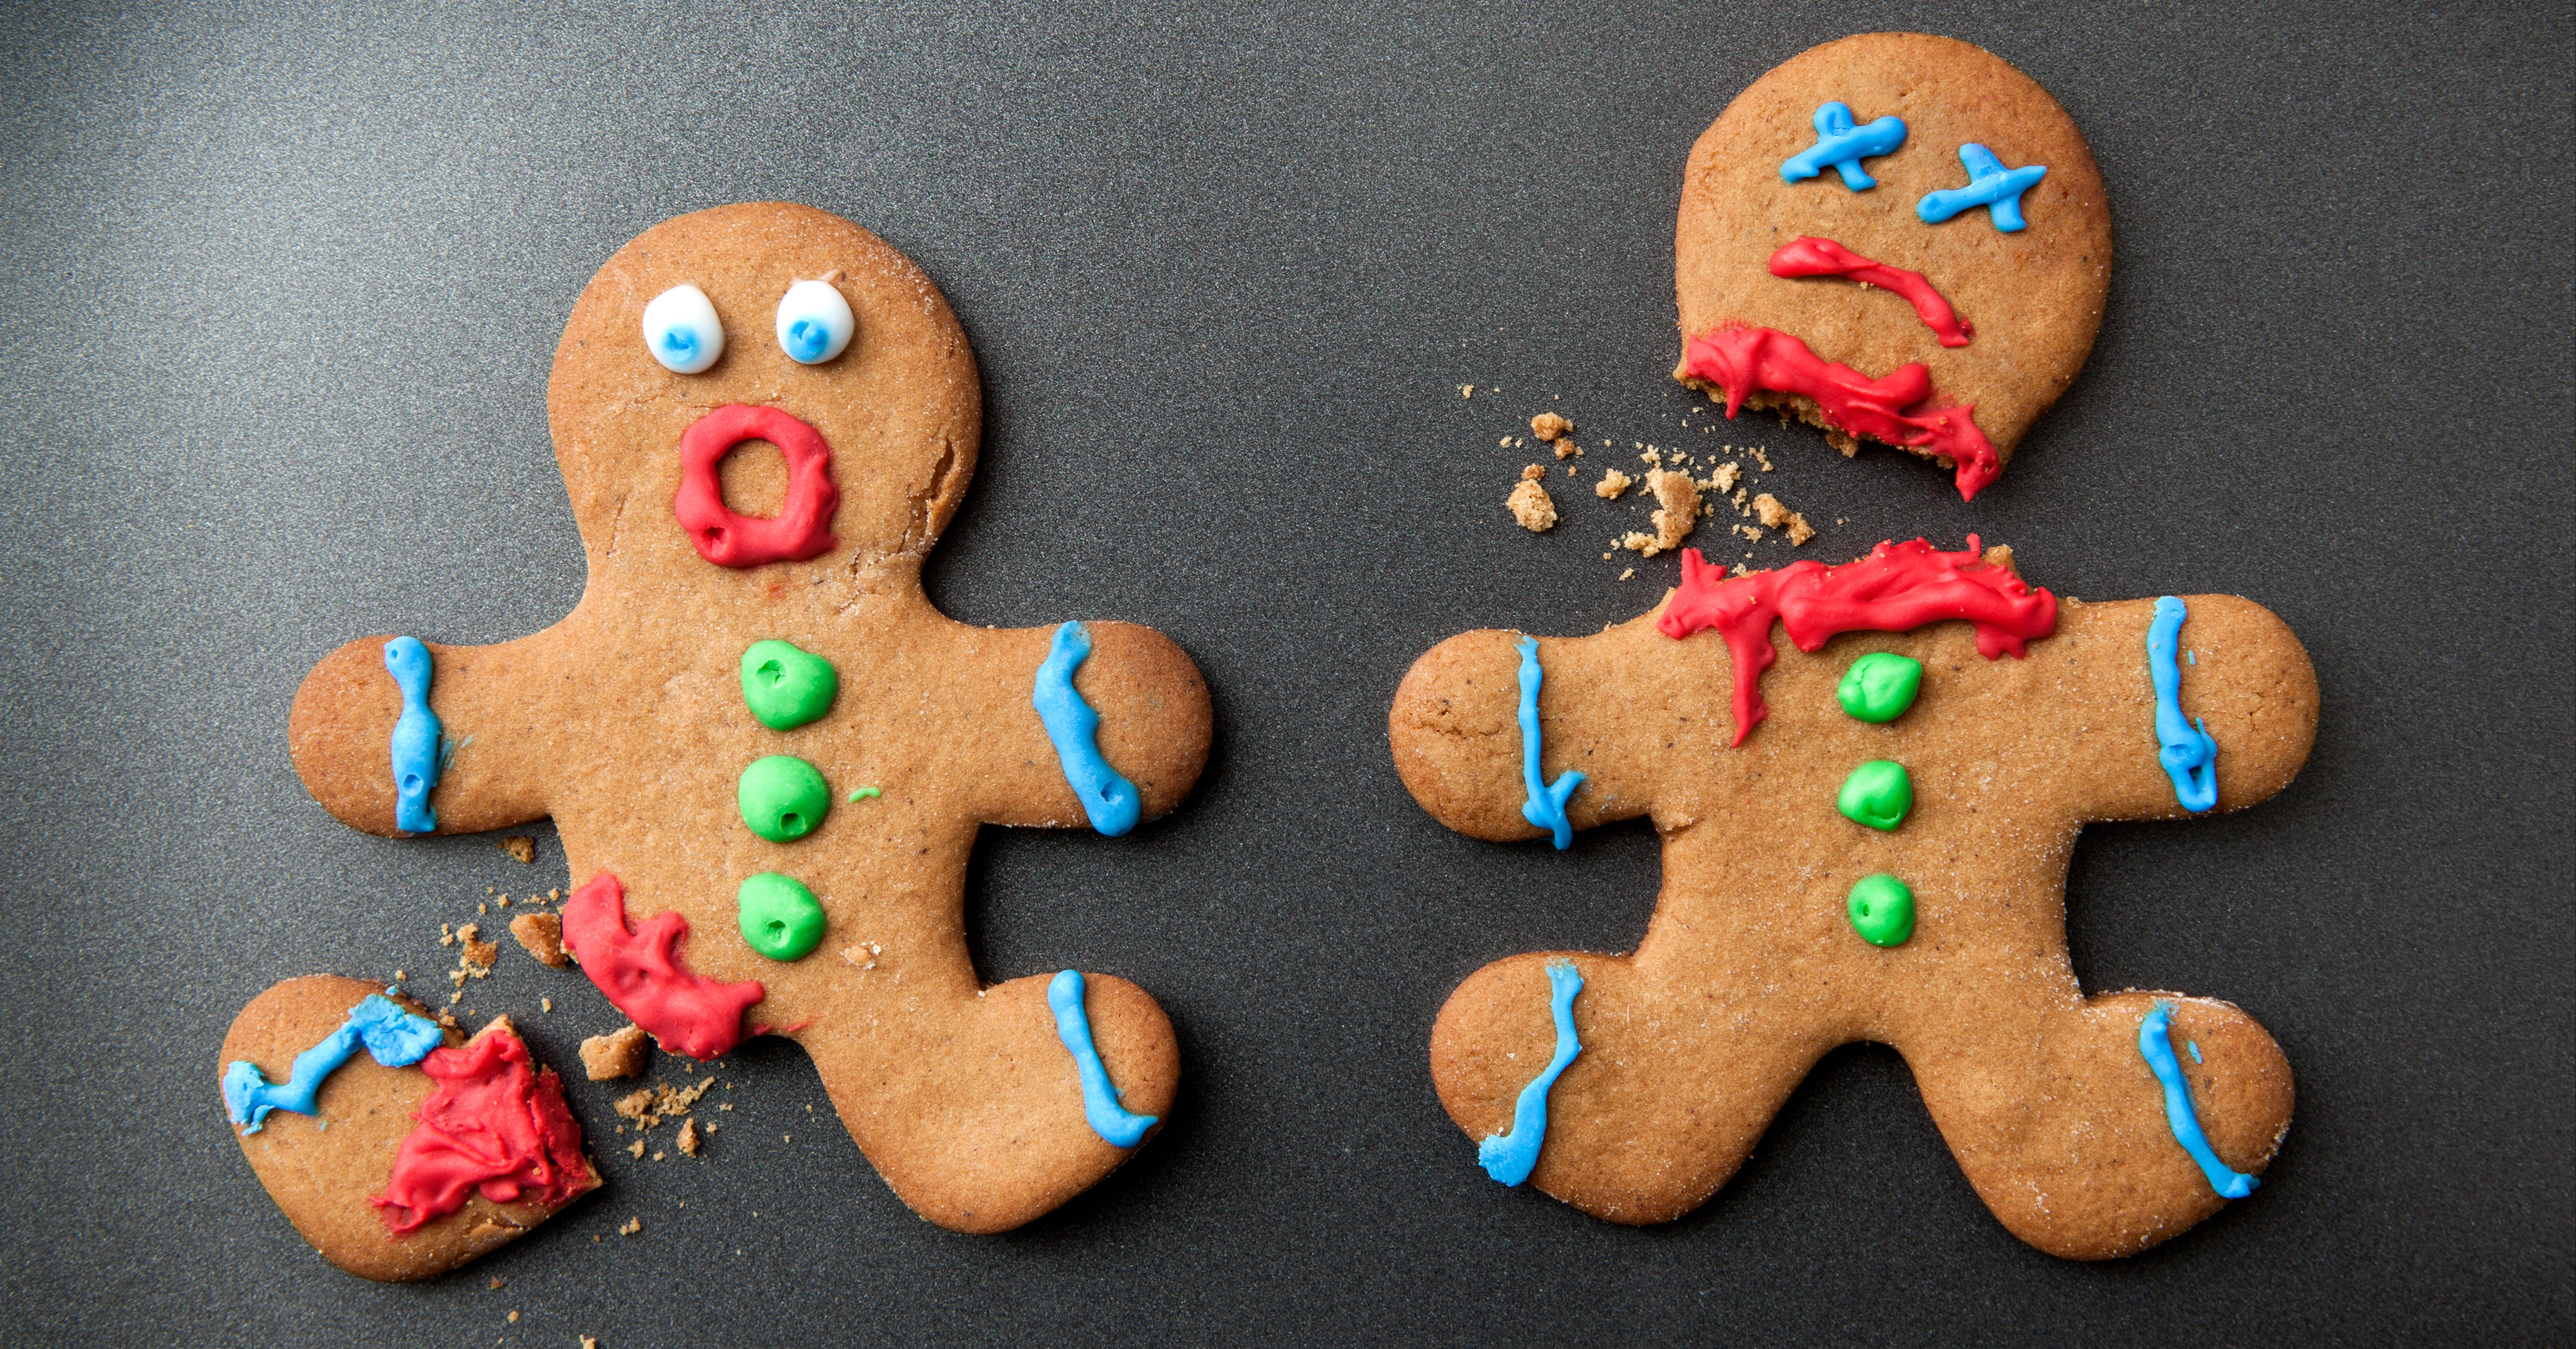 Decapitated gingerbread cookie next to shocked gingerbread cookie